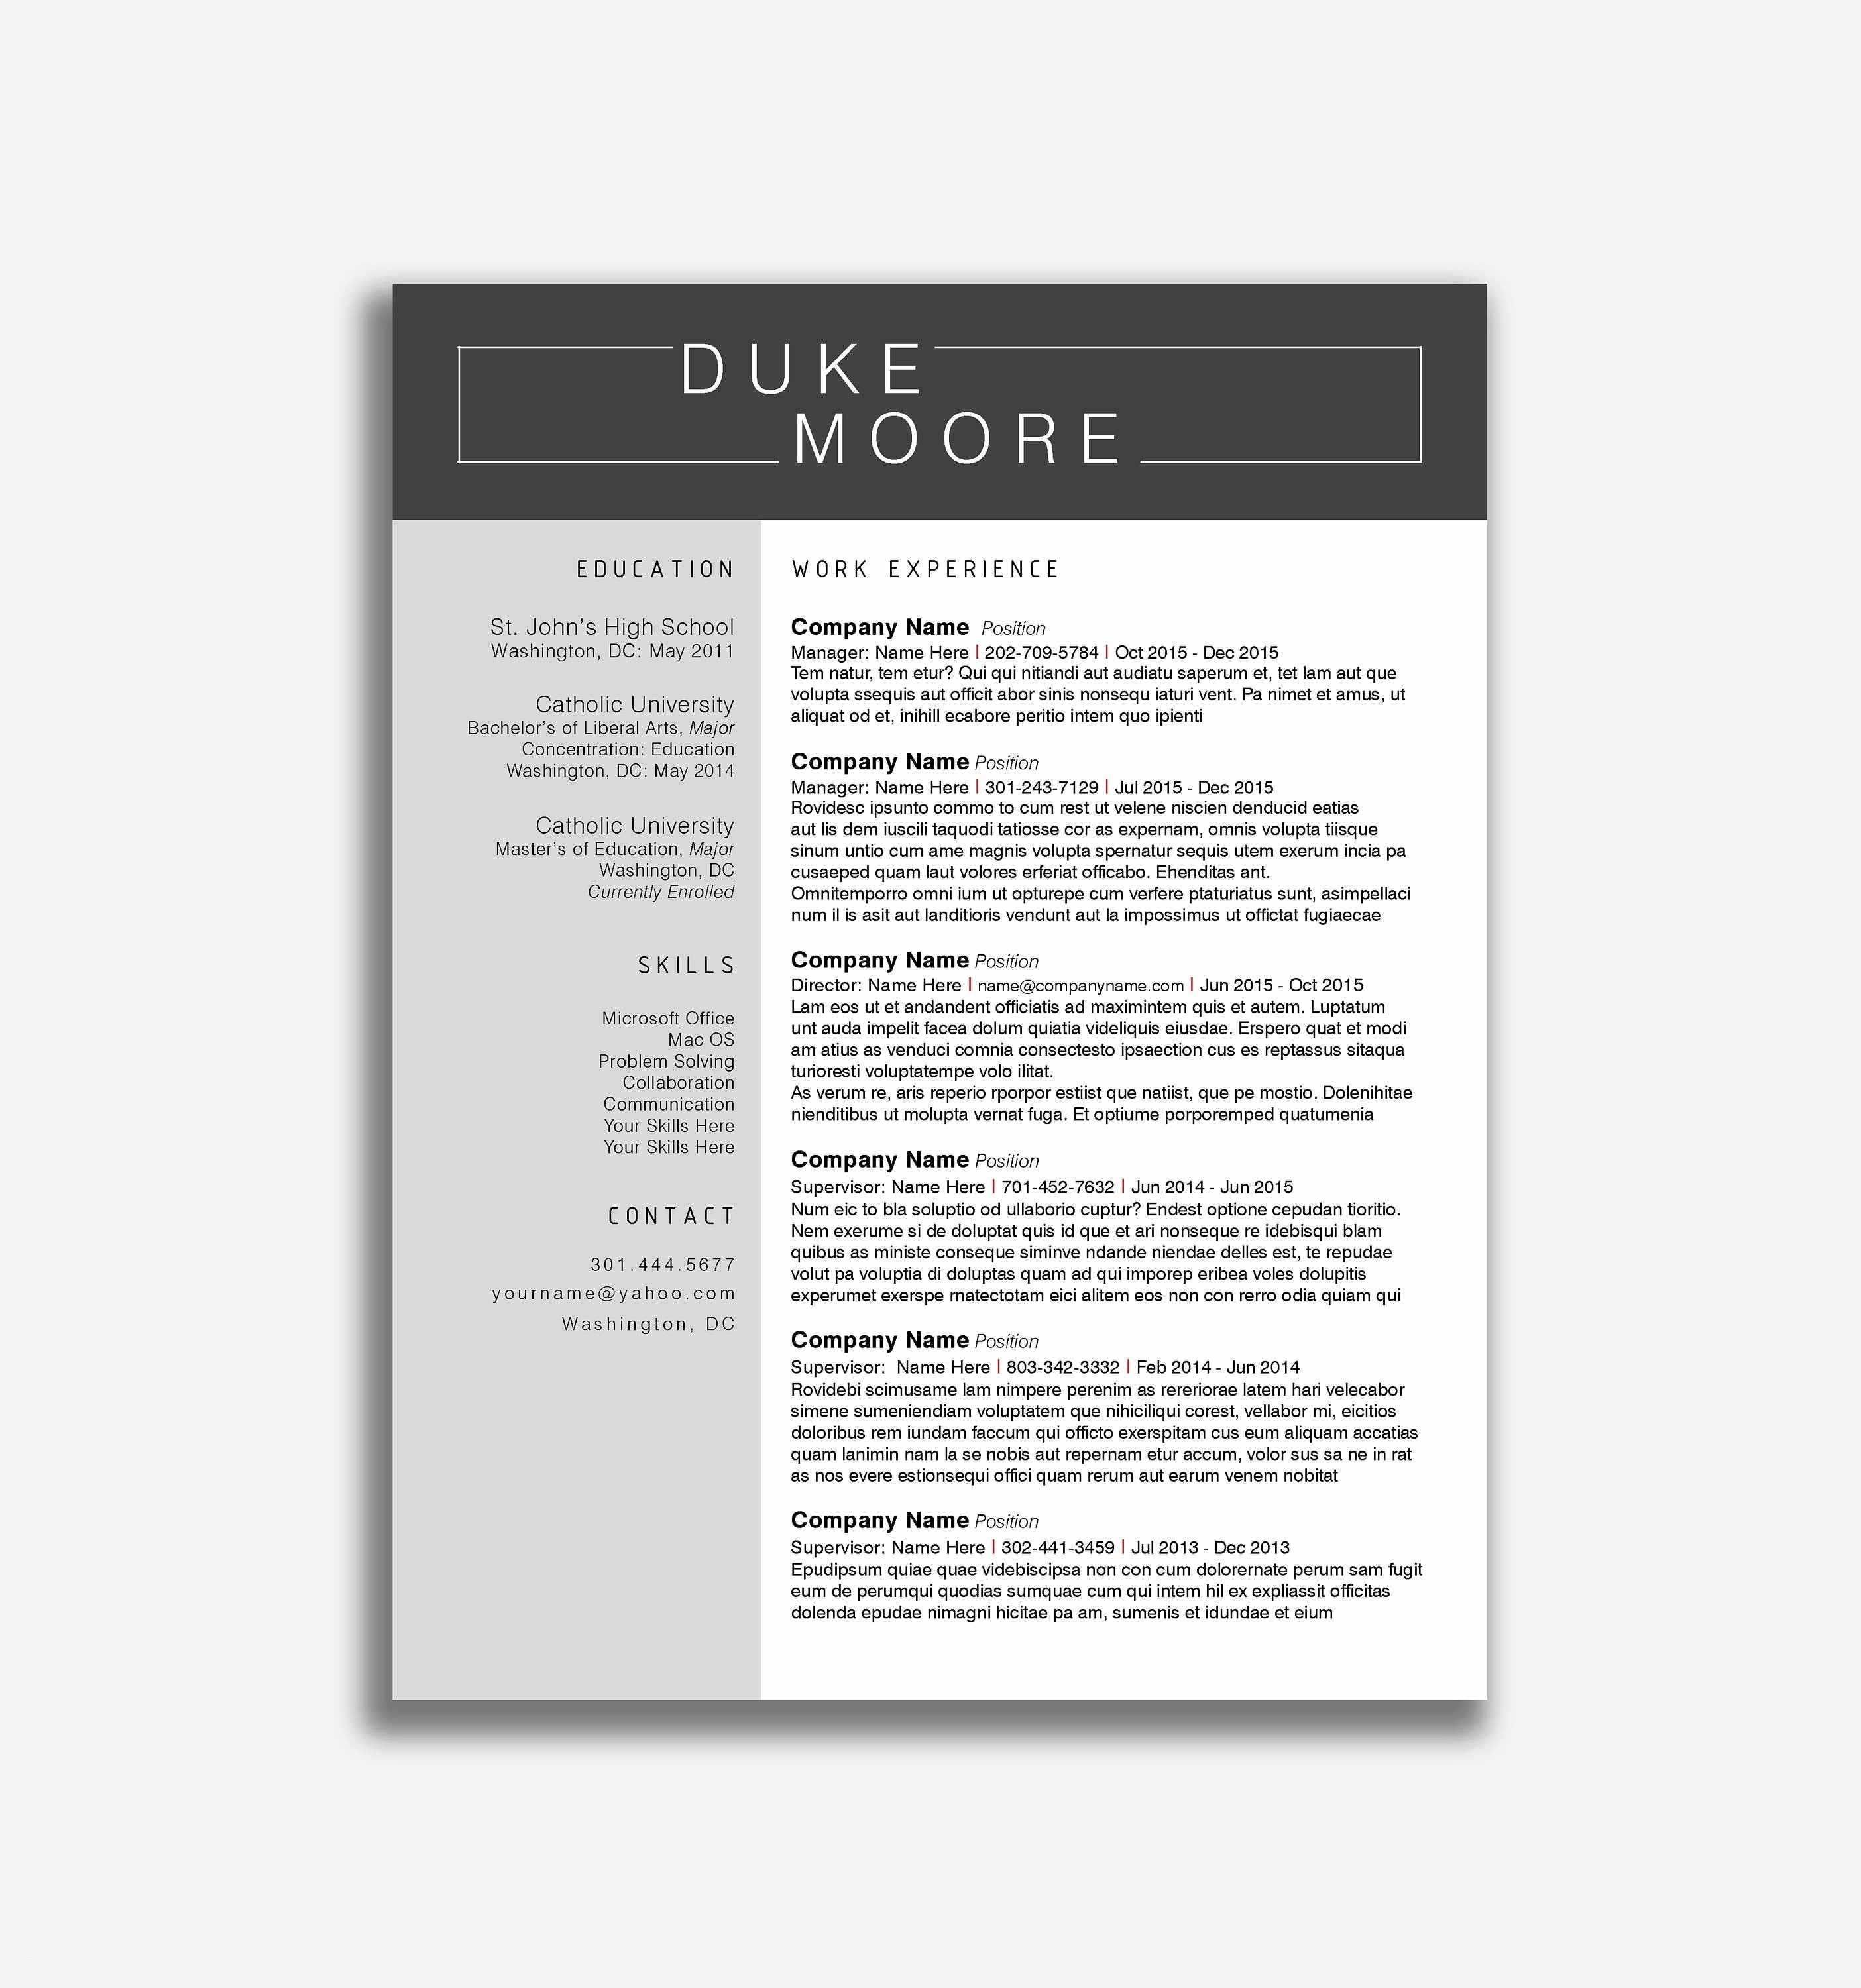 Resume Templates for Word 2010 Beautiful Free Microsoft Of Business Card Template for Word 2010